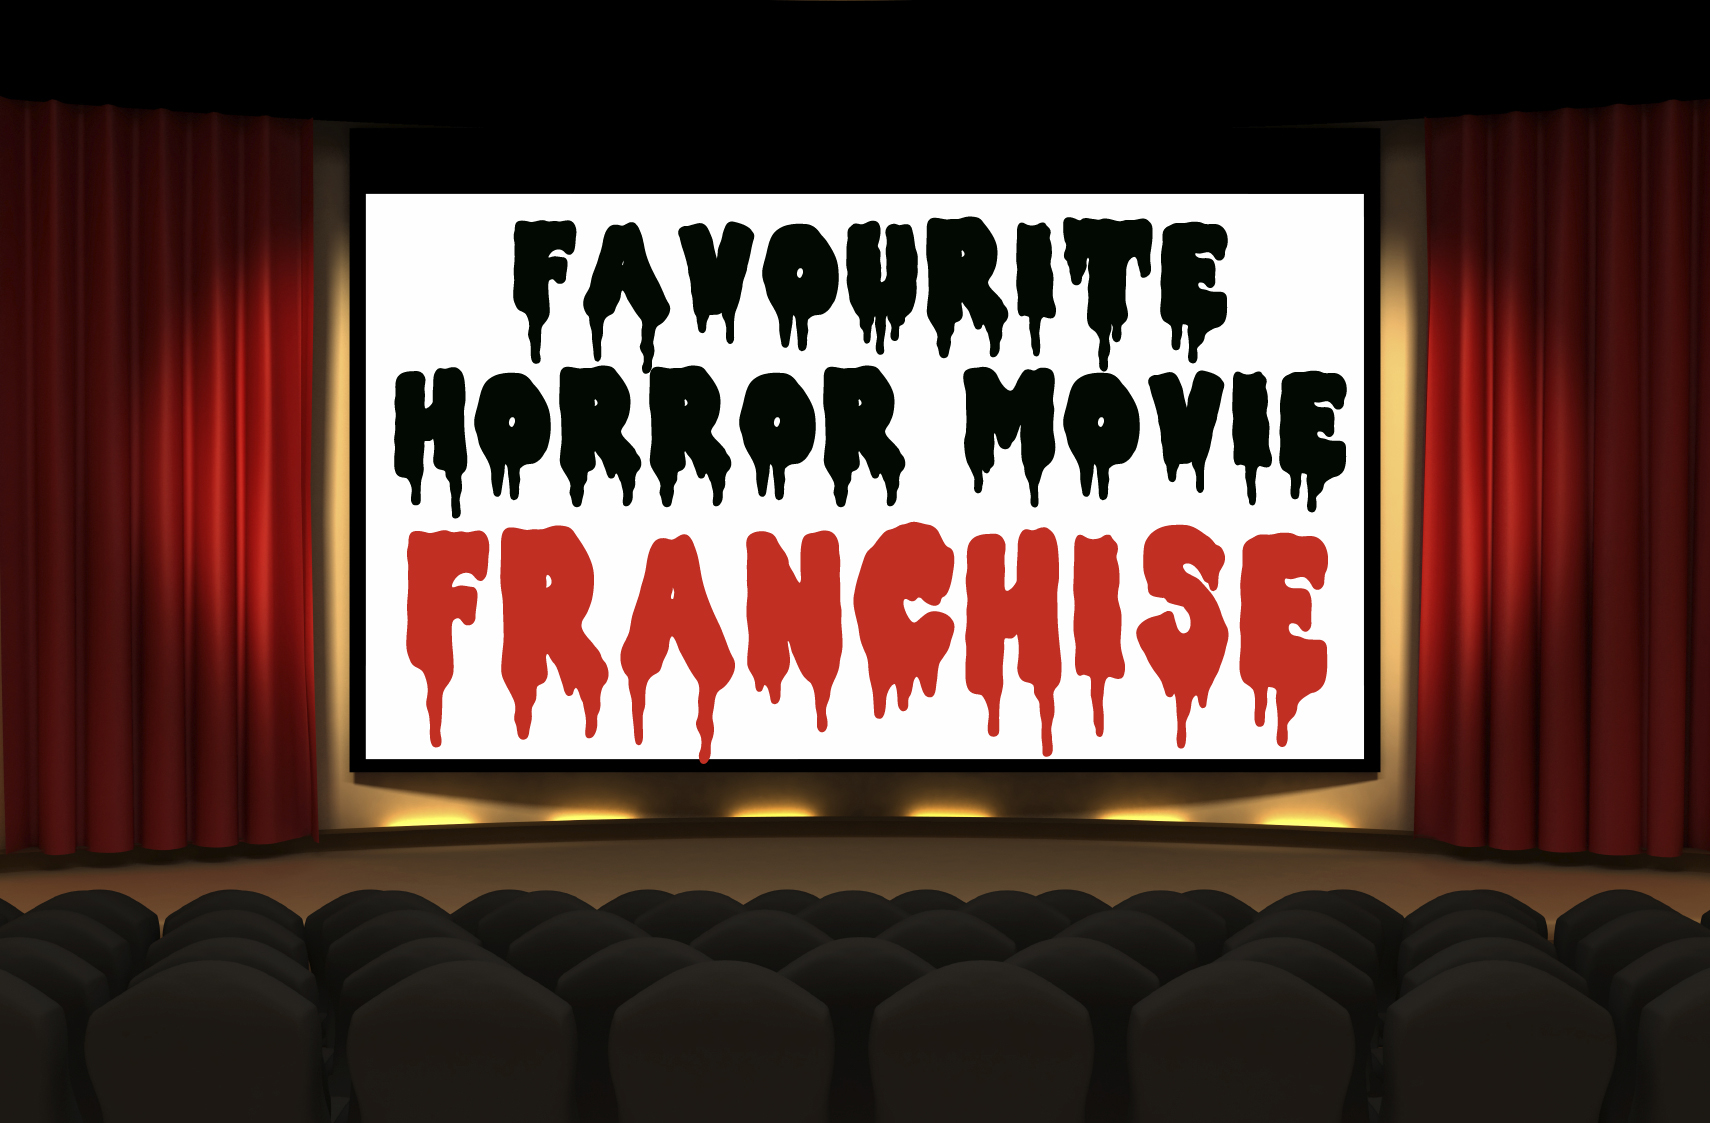 Thoughts On Film - Favourite horror movie franchise